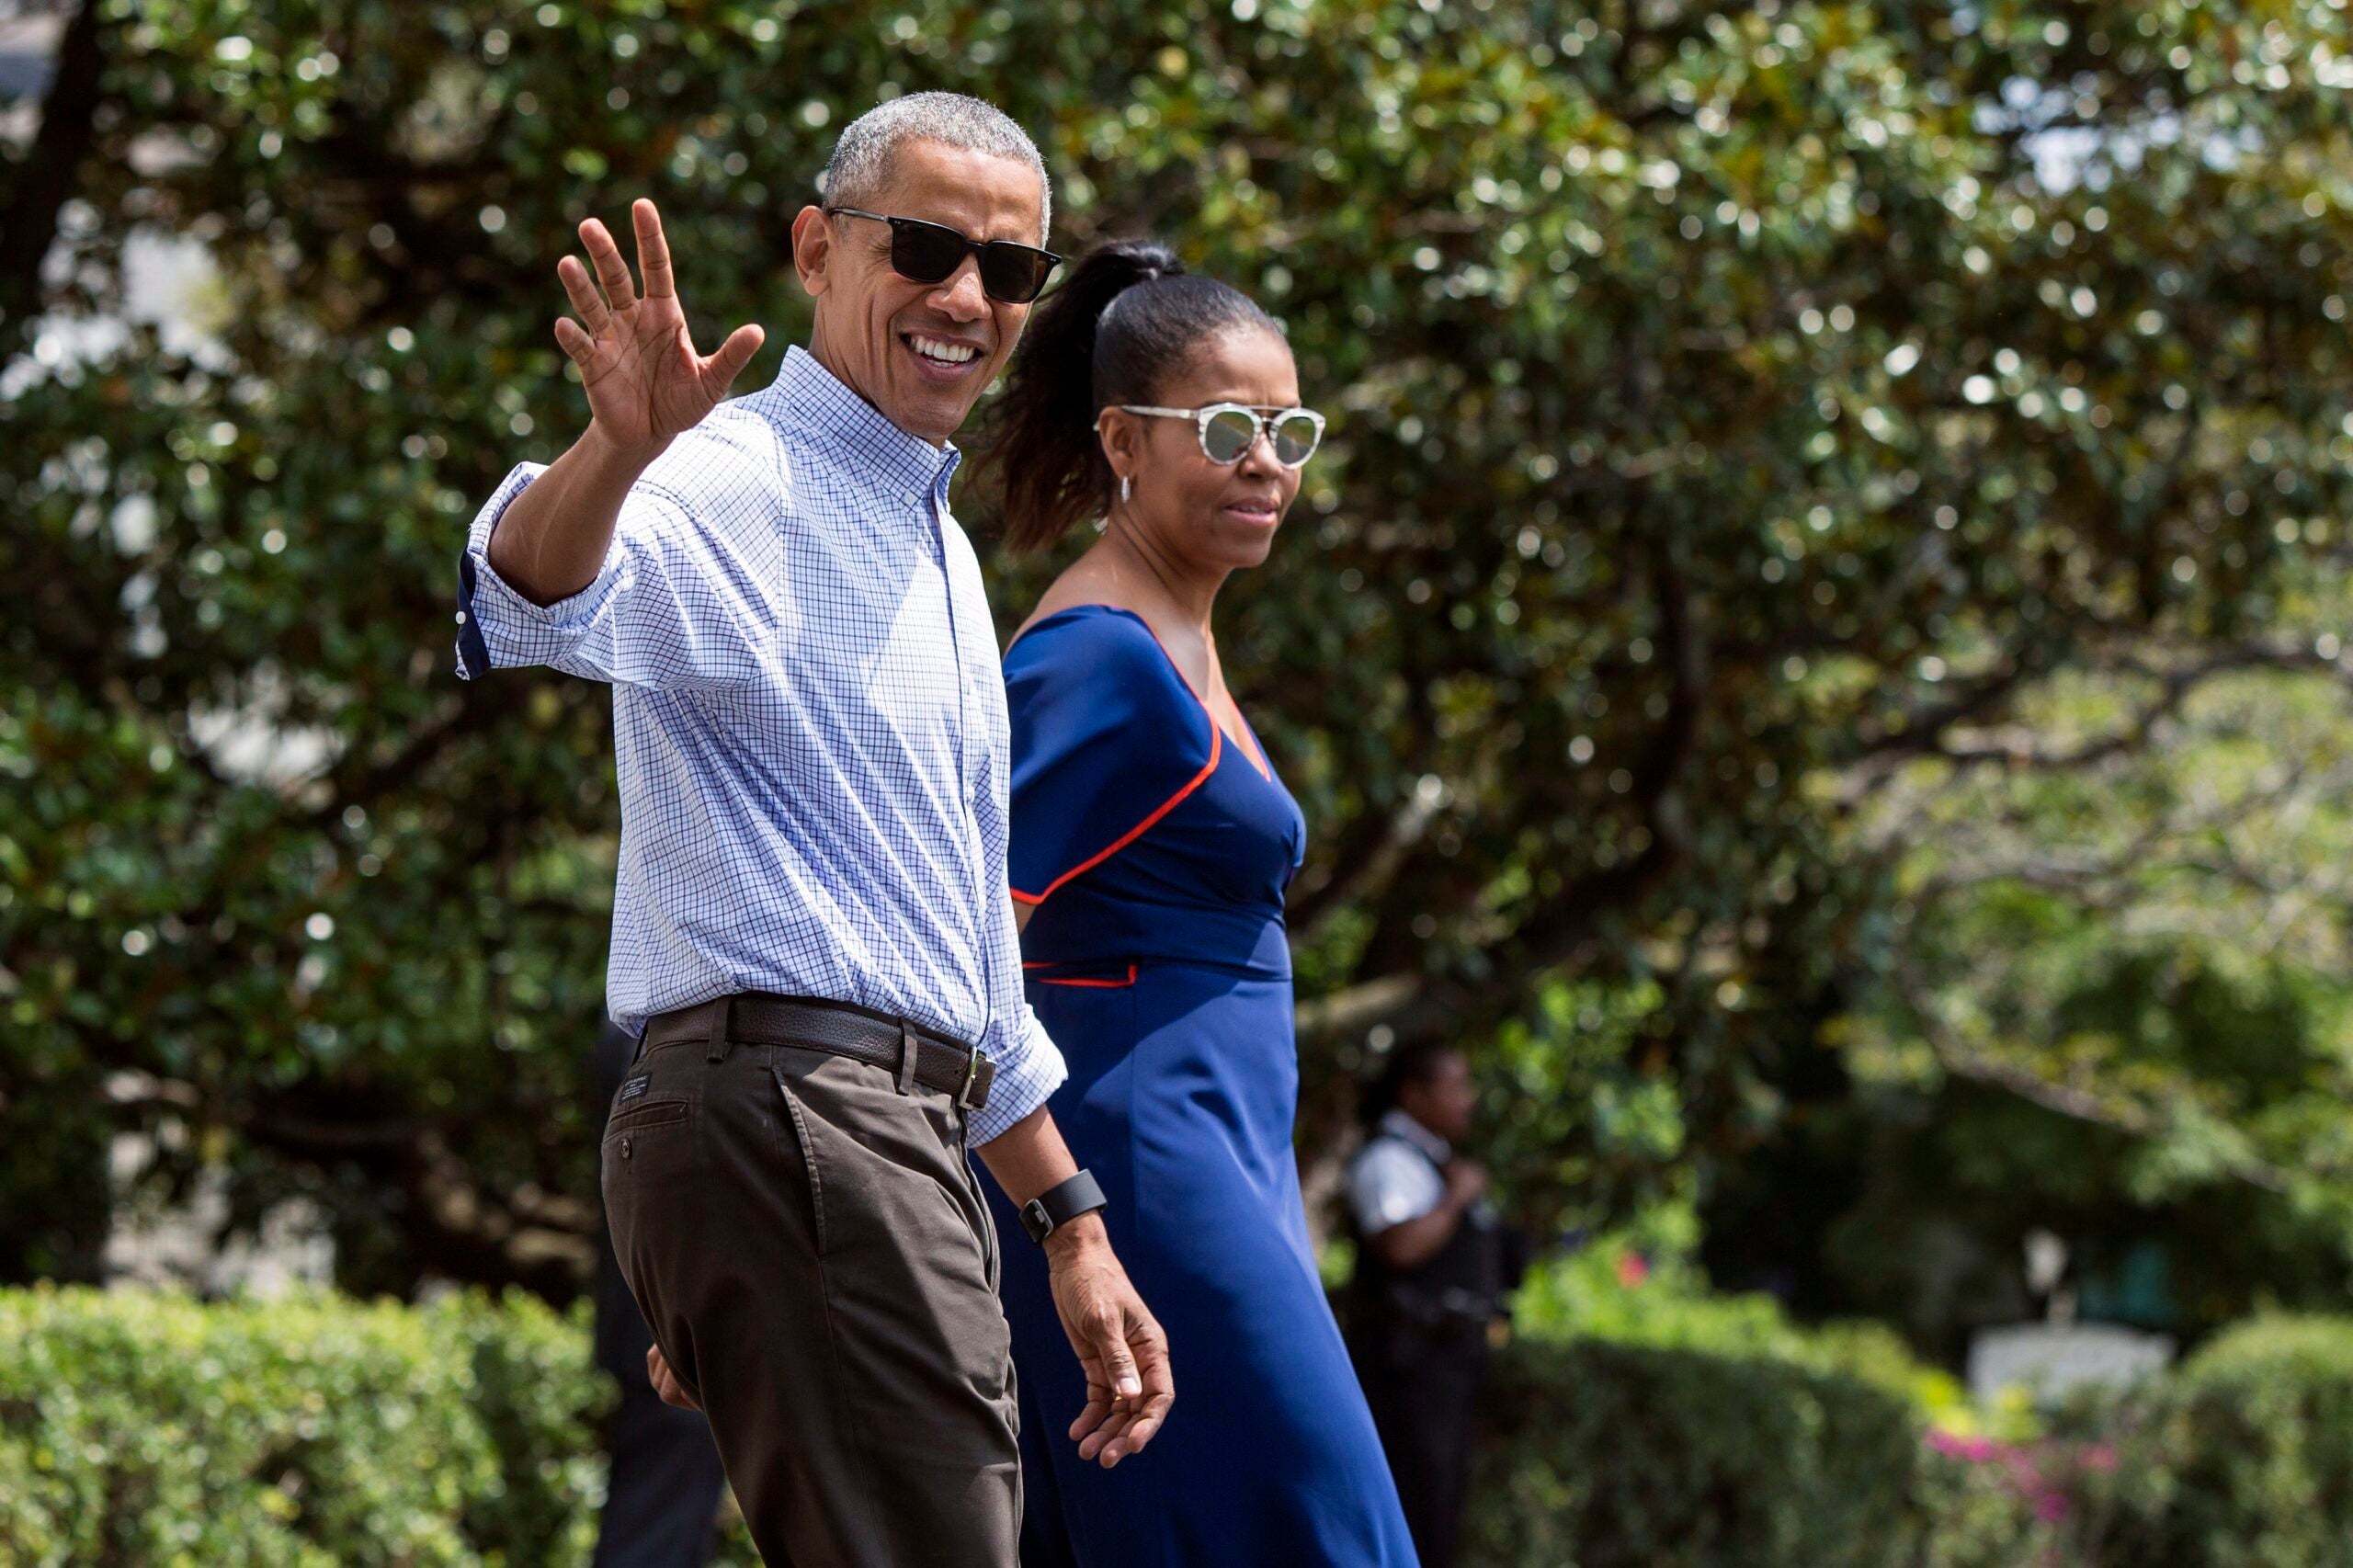 Former president Barack Obama and first lady Michelle Obama departed the White House for a trip to Martha's Vineyard on Aug. 6, 2016.